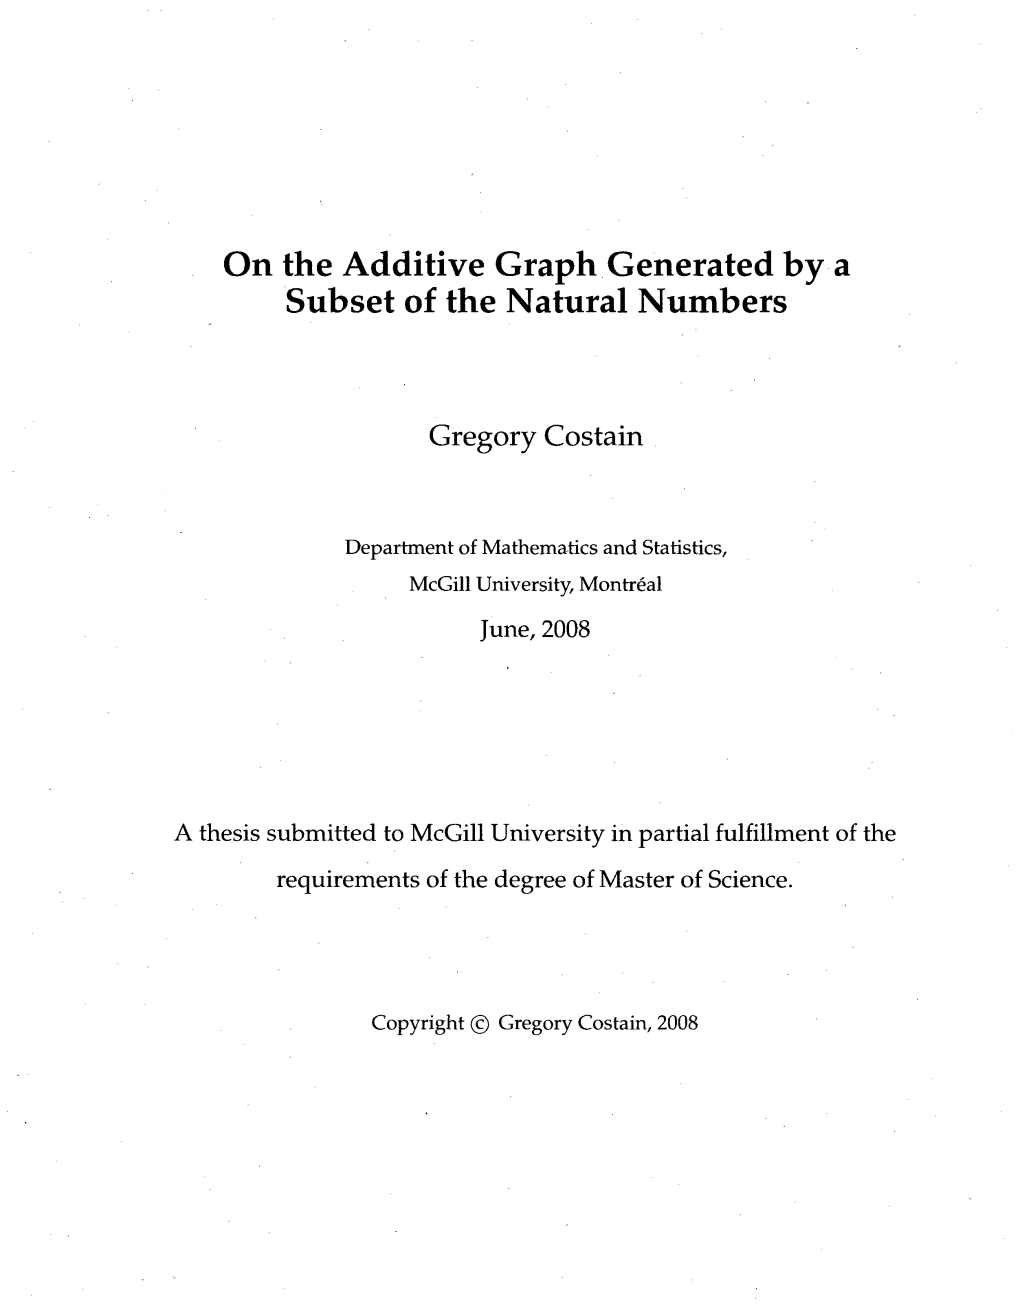 On the Additive Graph Generated by a Subset of the Natural Numbers